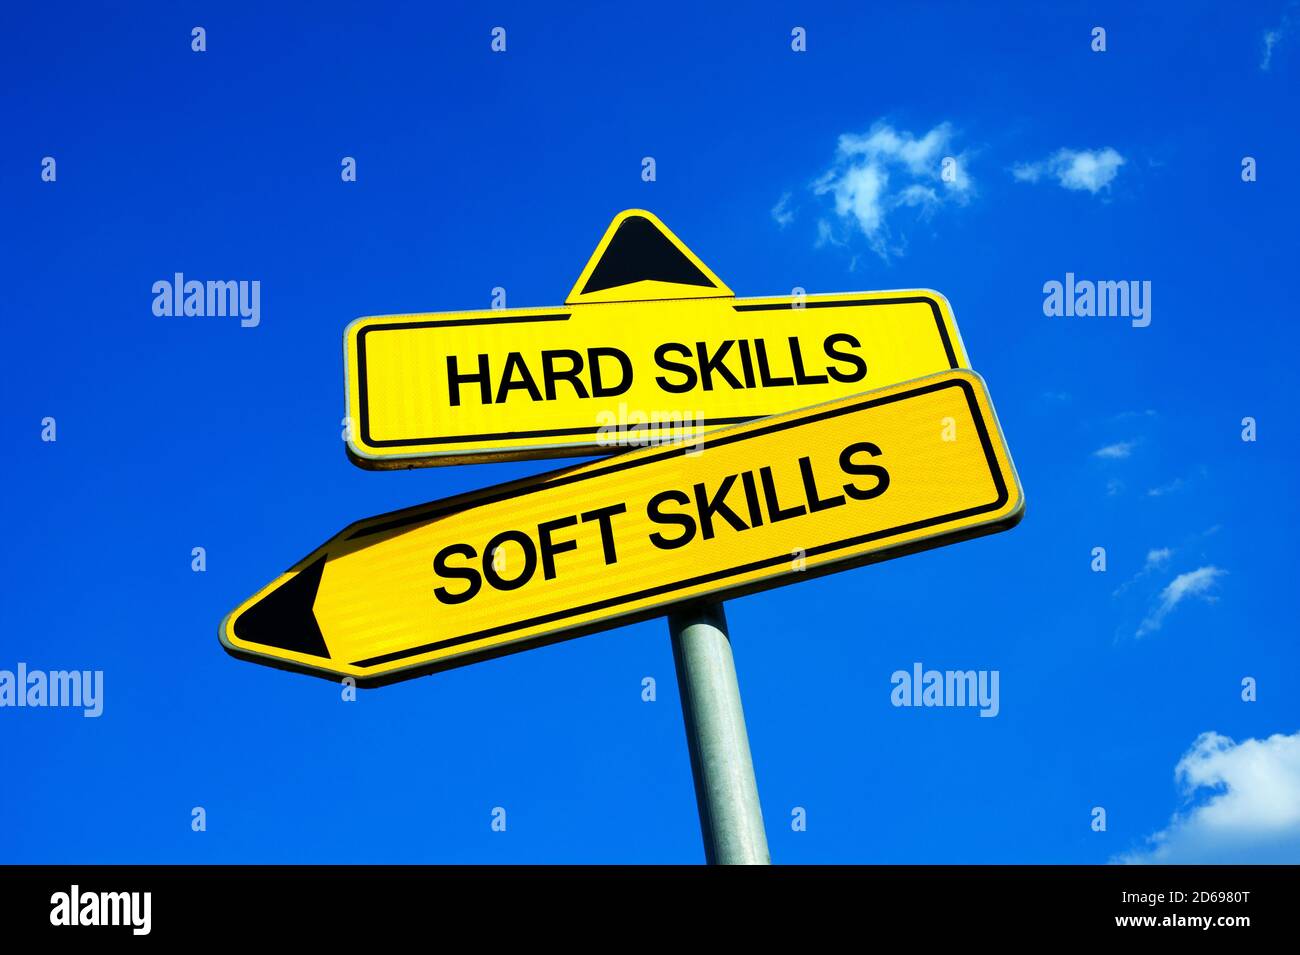 Hard Skills vs Soft Skills - Traffic sign with two options - dilemma between abilities and capabilities. Technical and practical knowledge vs social a Stock Photo